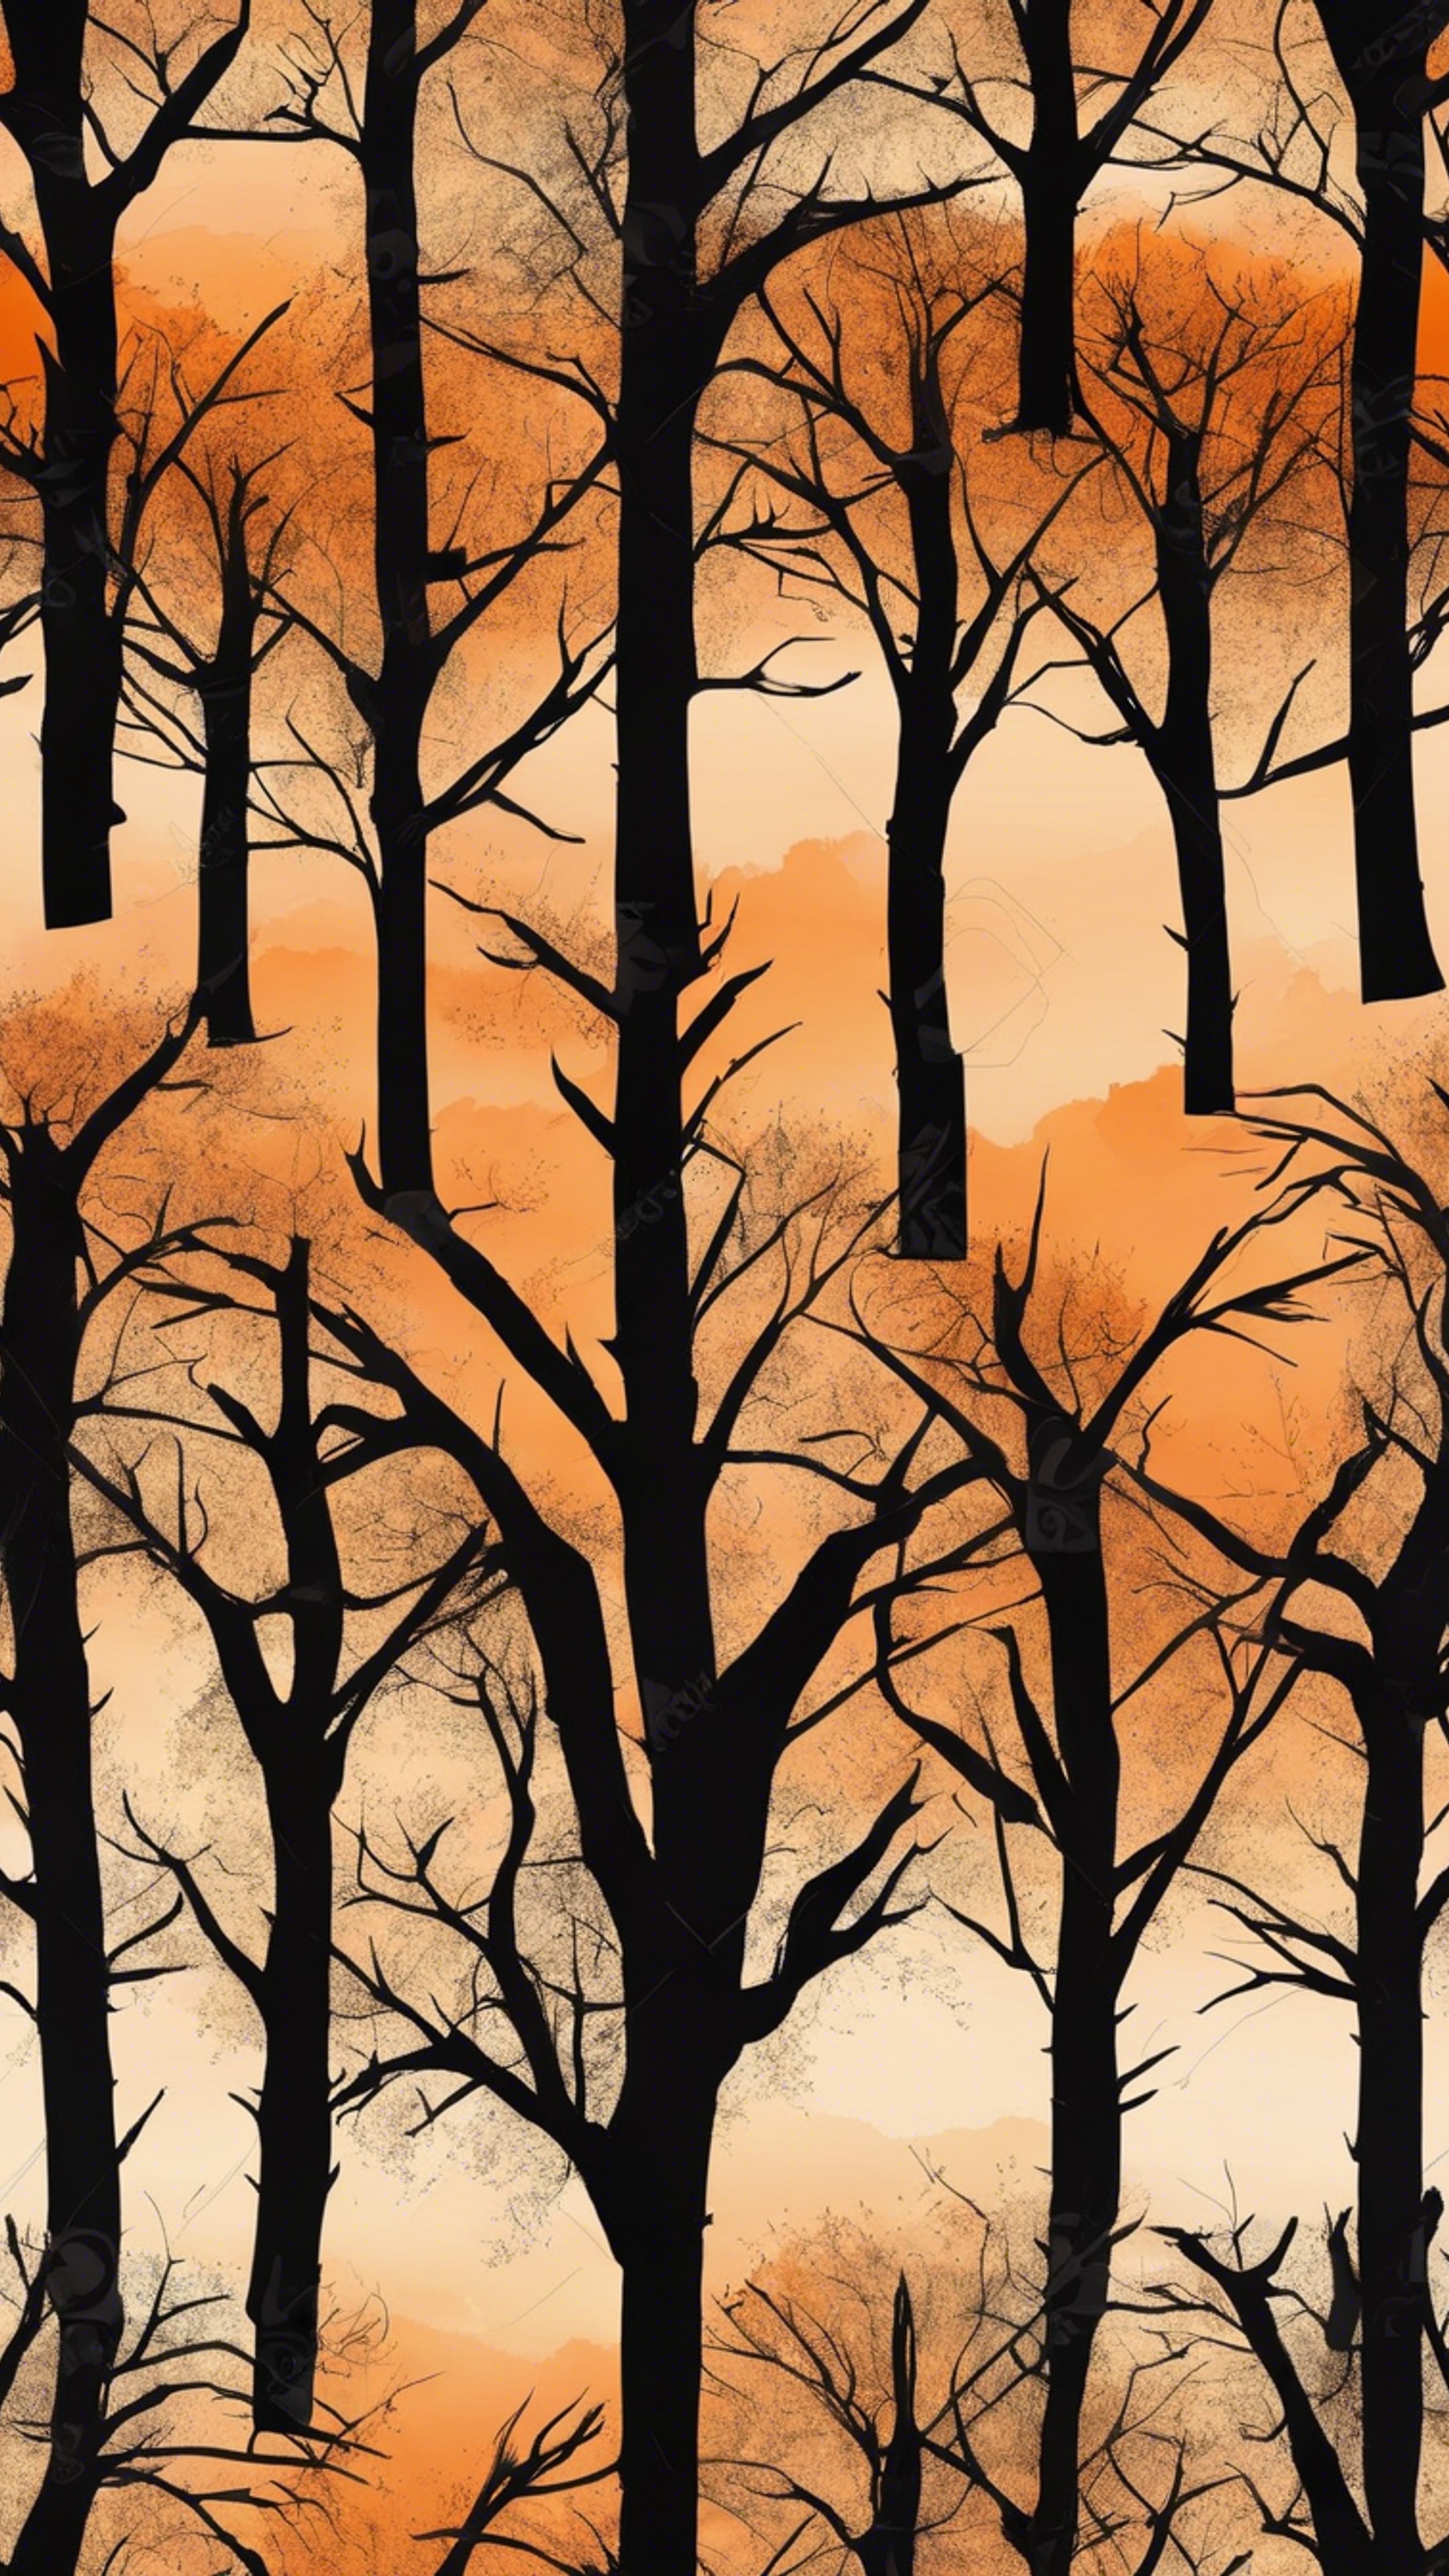 Seamless pattern of black tree silhouettes against an orange autumn sunset background.壁紙[c849dc5a54374a148f3f]